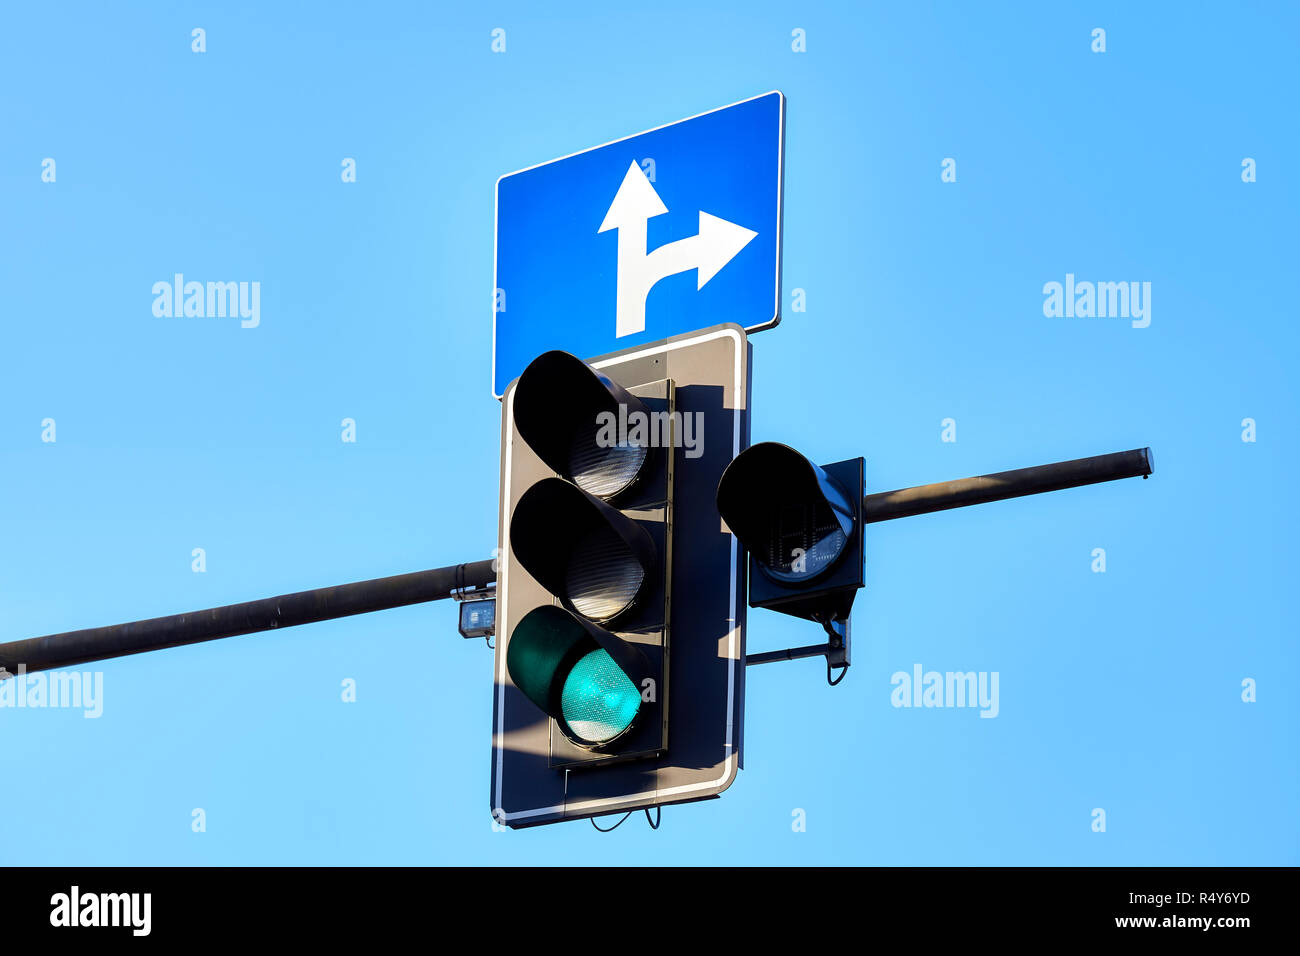 Traffic light against the blue sky, green color displayed. Stock Photo